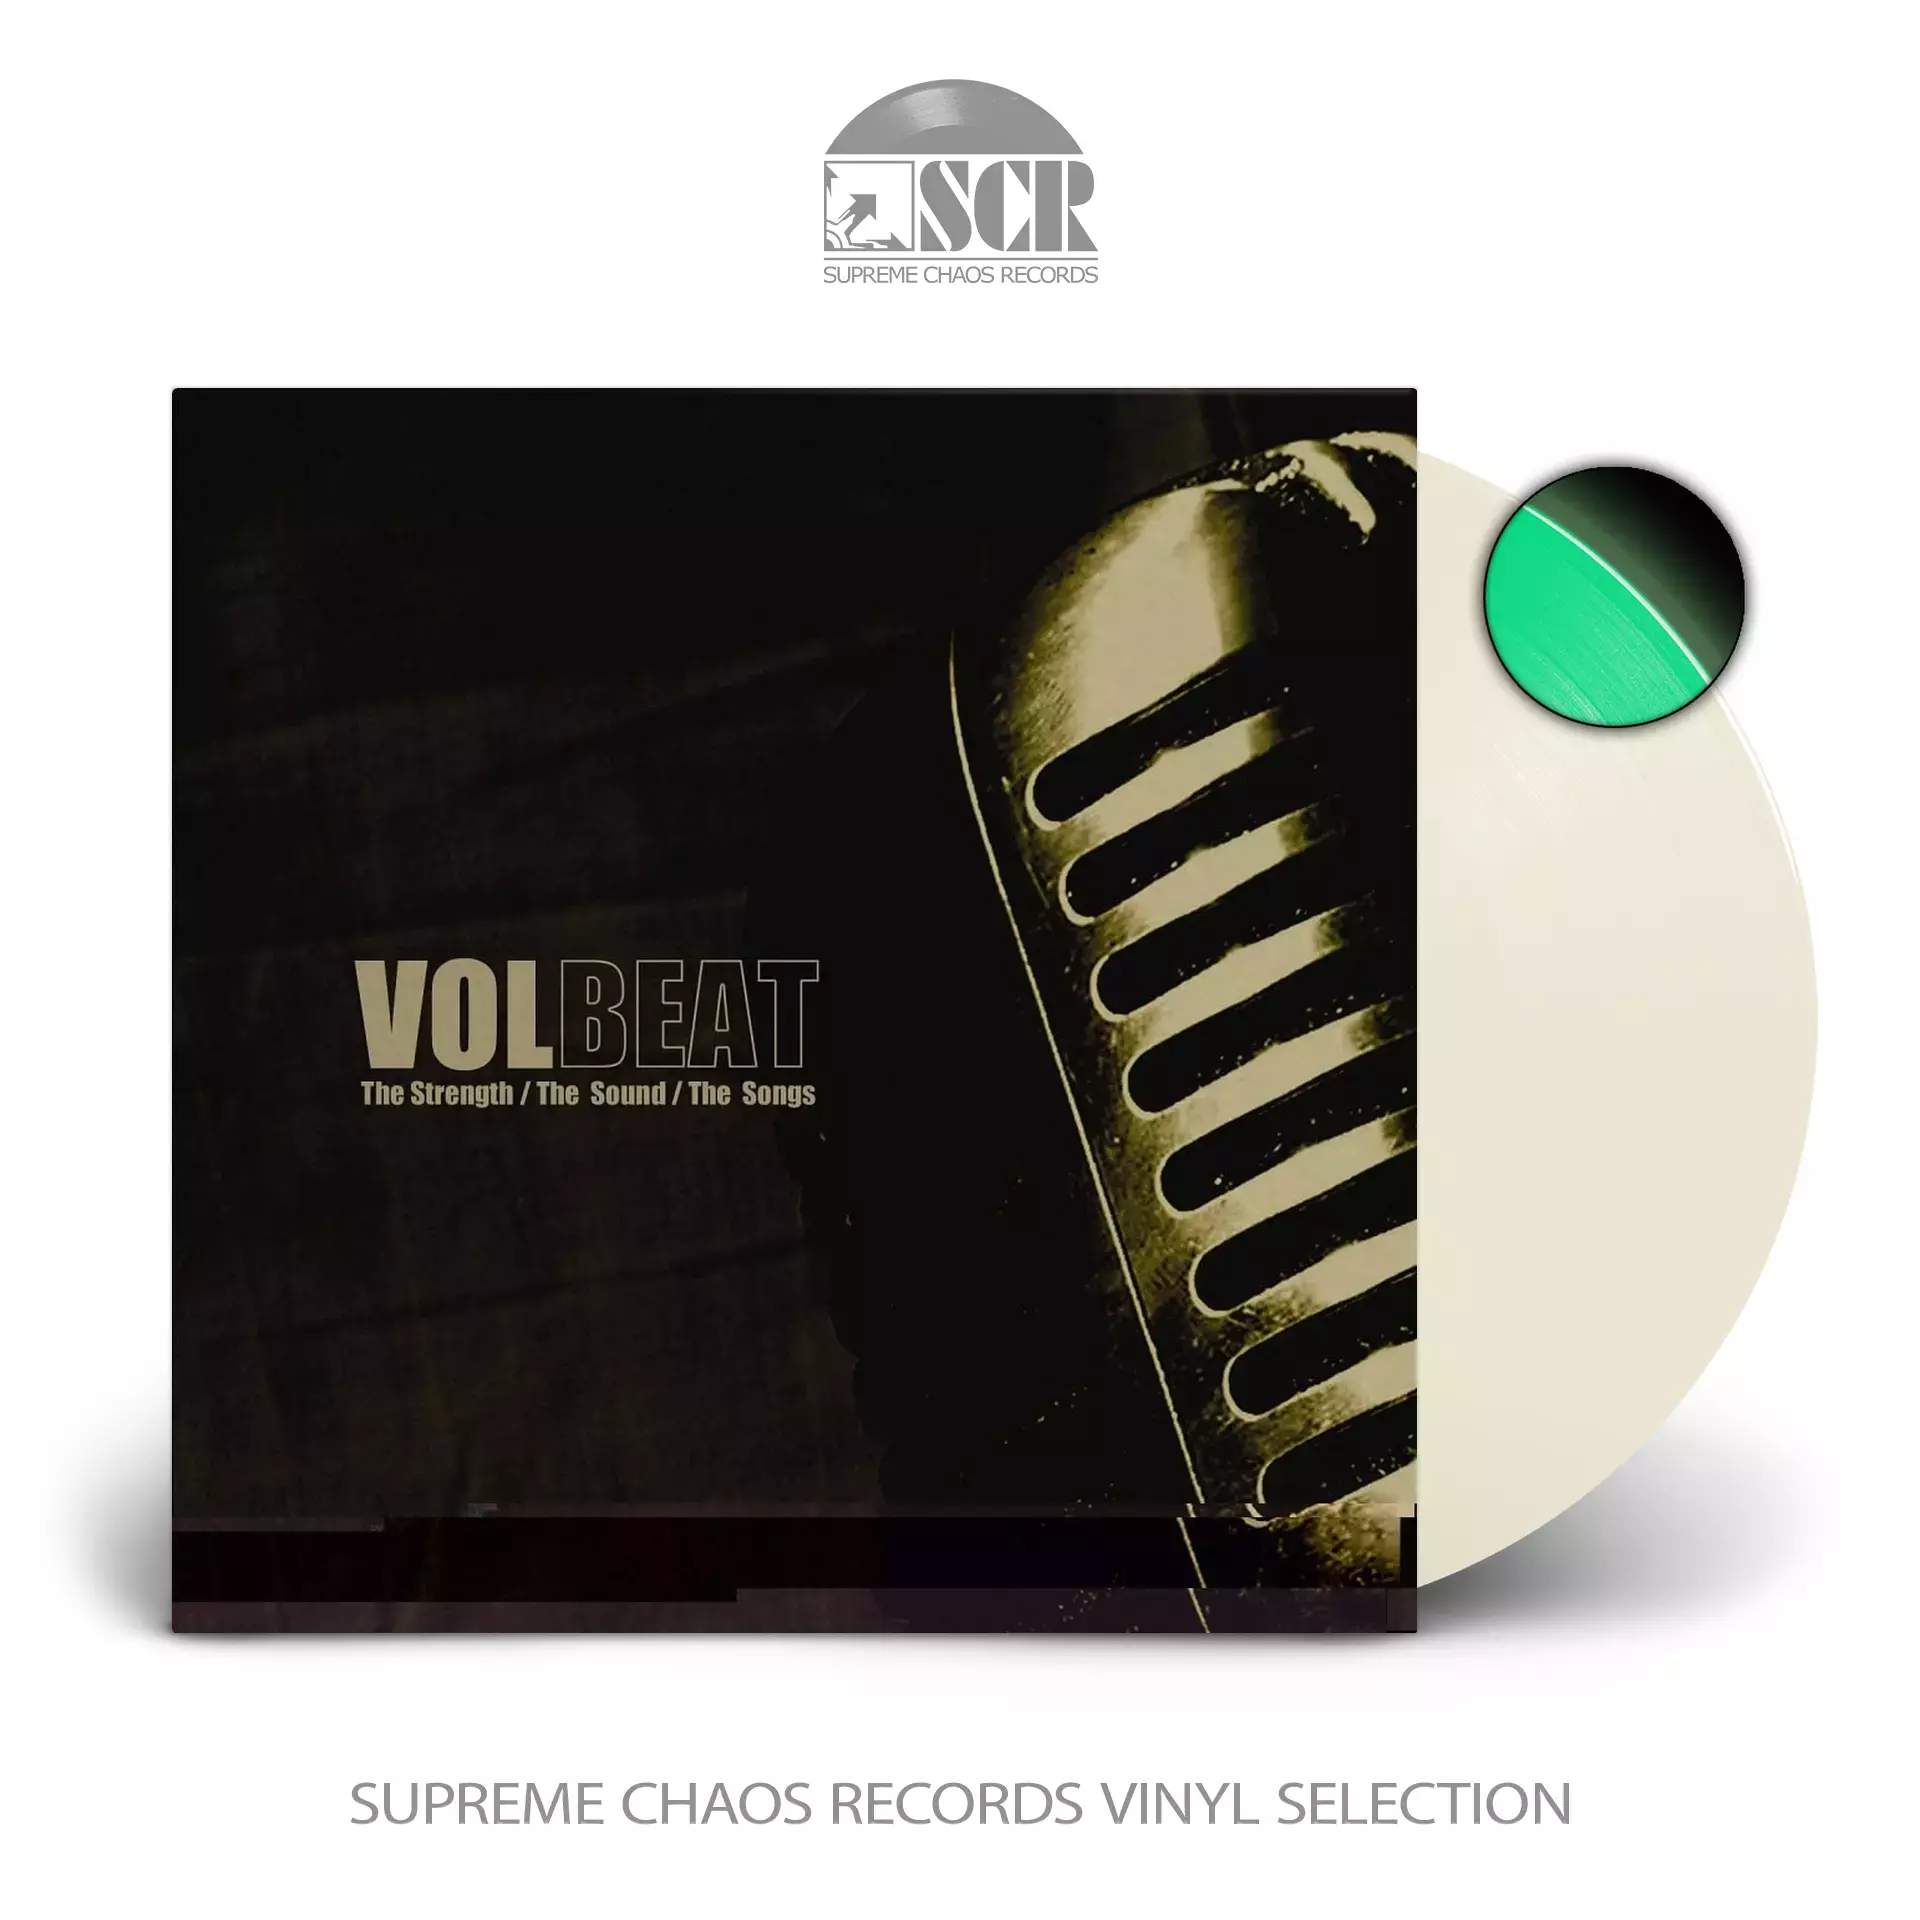 VOLBEAT - The Strength / The Sound / The Songs [GLOW IN DARK VINYL LP]